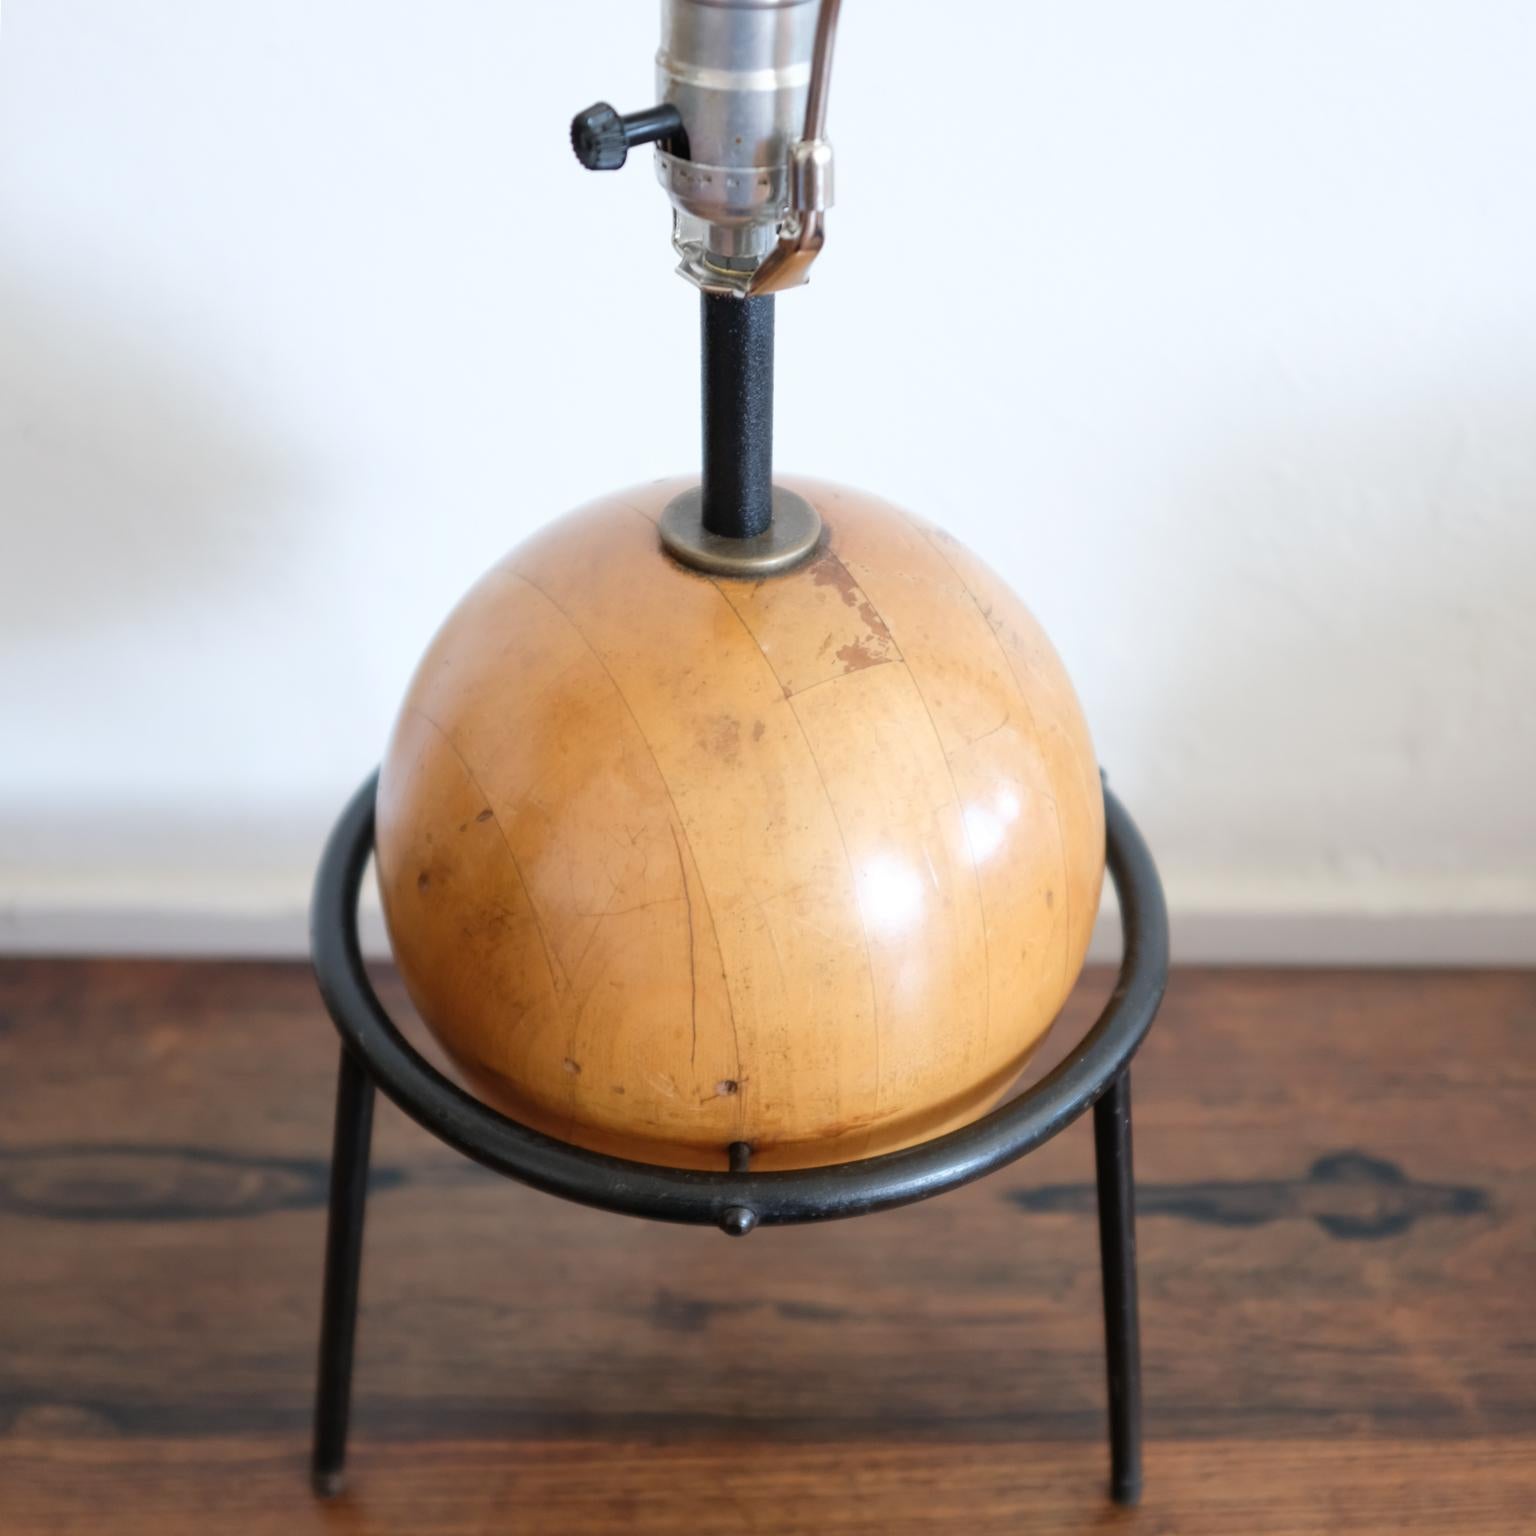 California Modern Iron and Wood Lamps by Albert Blake, 1951 For Sale 1